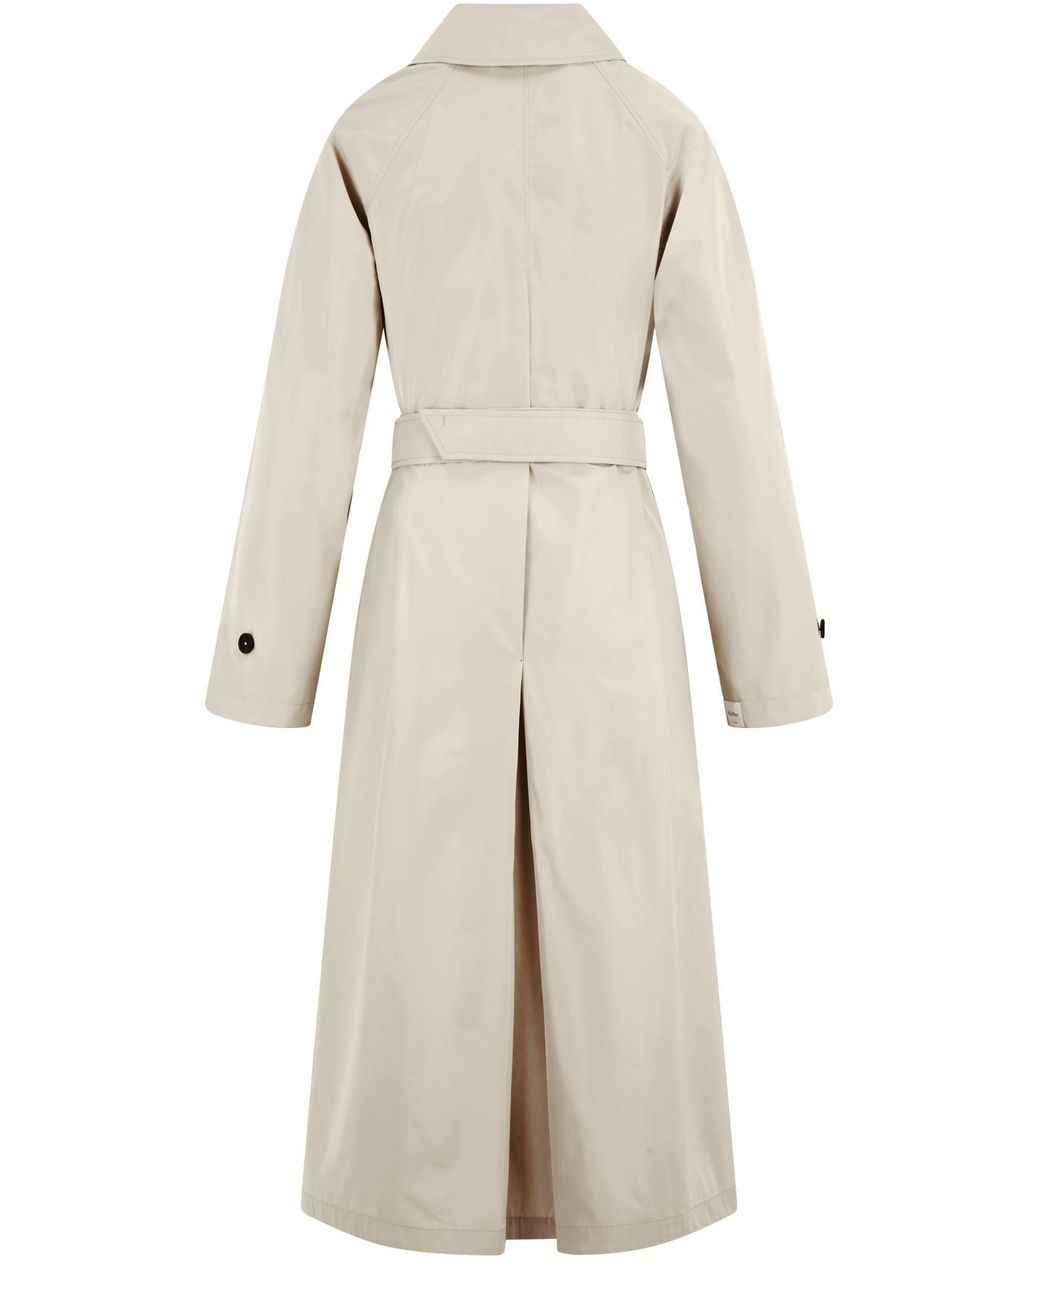 Max Mara Aimper Trench Coat - The Cube in Natural | Lyst